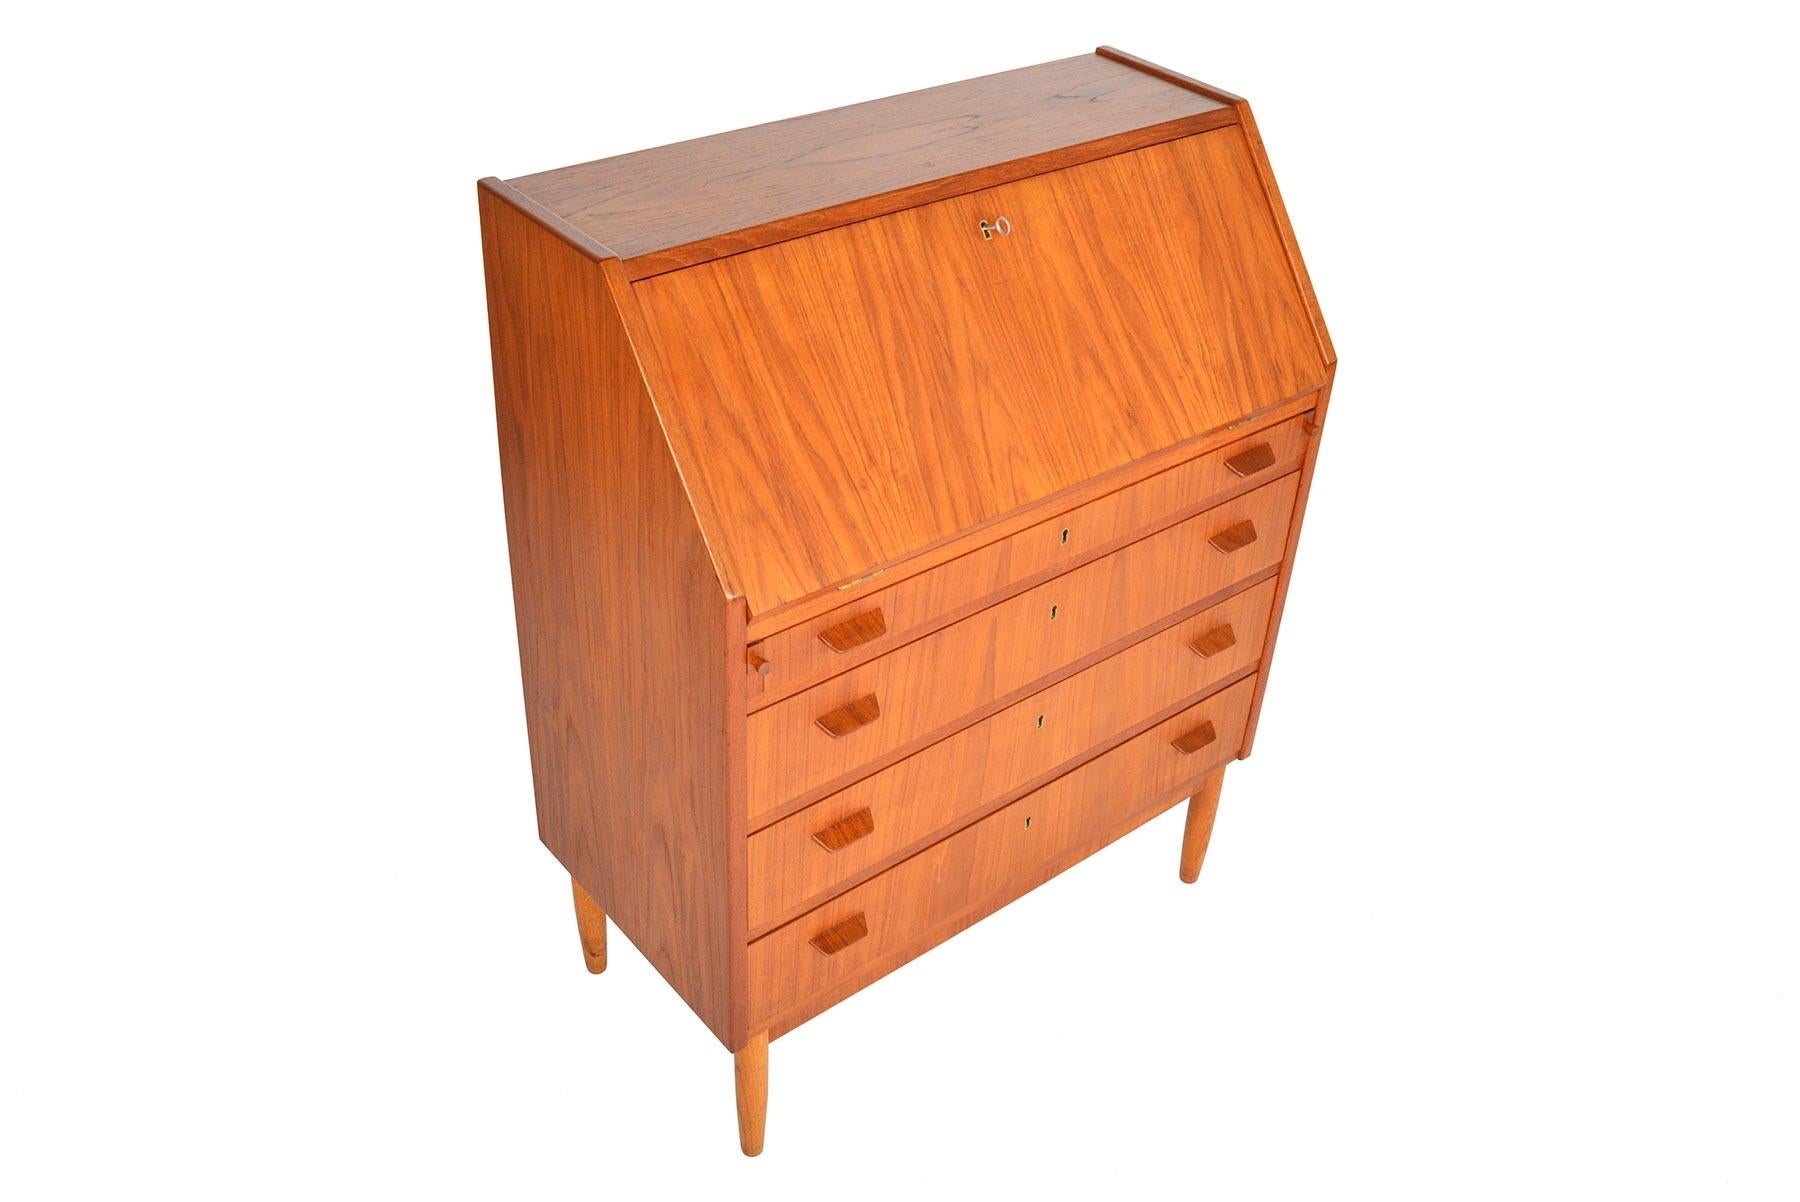 This compact Danish modern teak secretary offers beautiful angles and impressive storage. Drop- down door is supported by two felt- lined runners and reveals a writing surface with eight small drawers. Four lower drawers with brass escutcheons